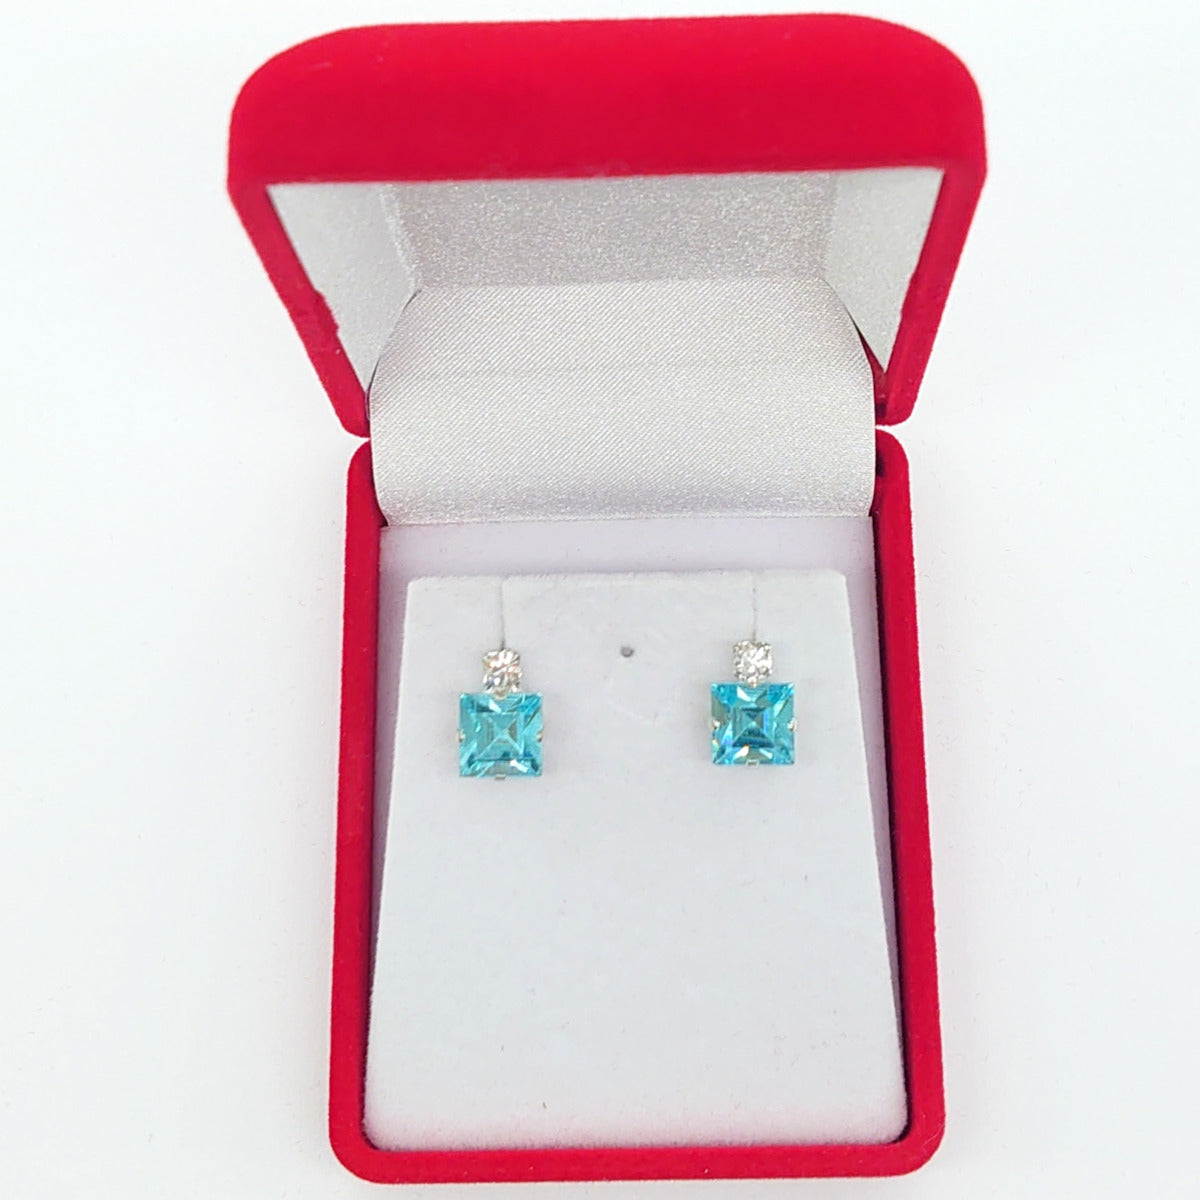 Small Square Earrings - Swarovski Crystals - Silver Fittings